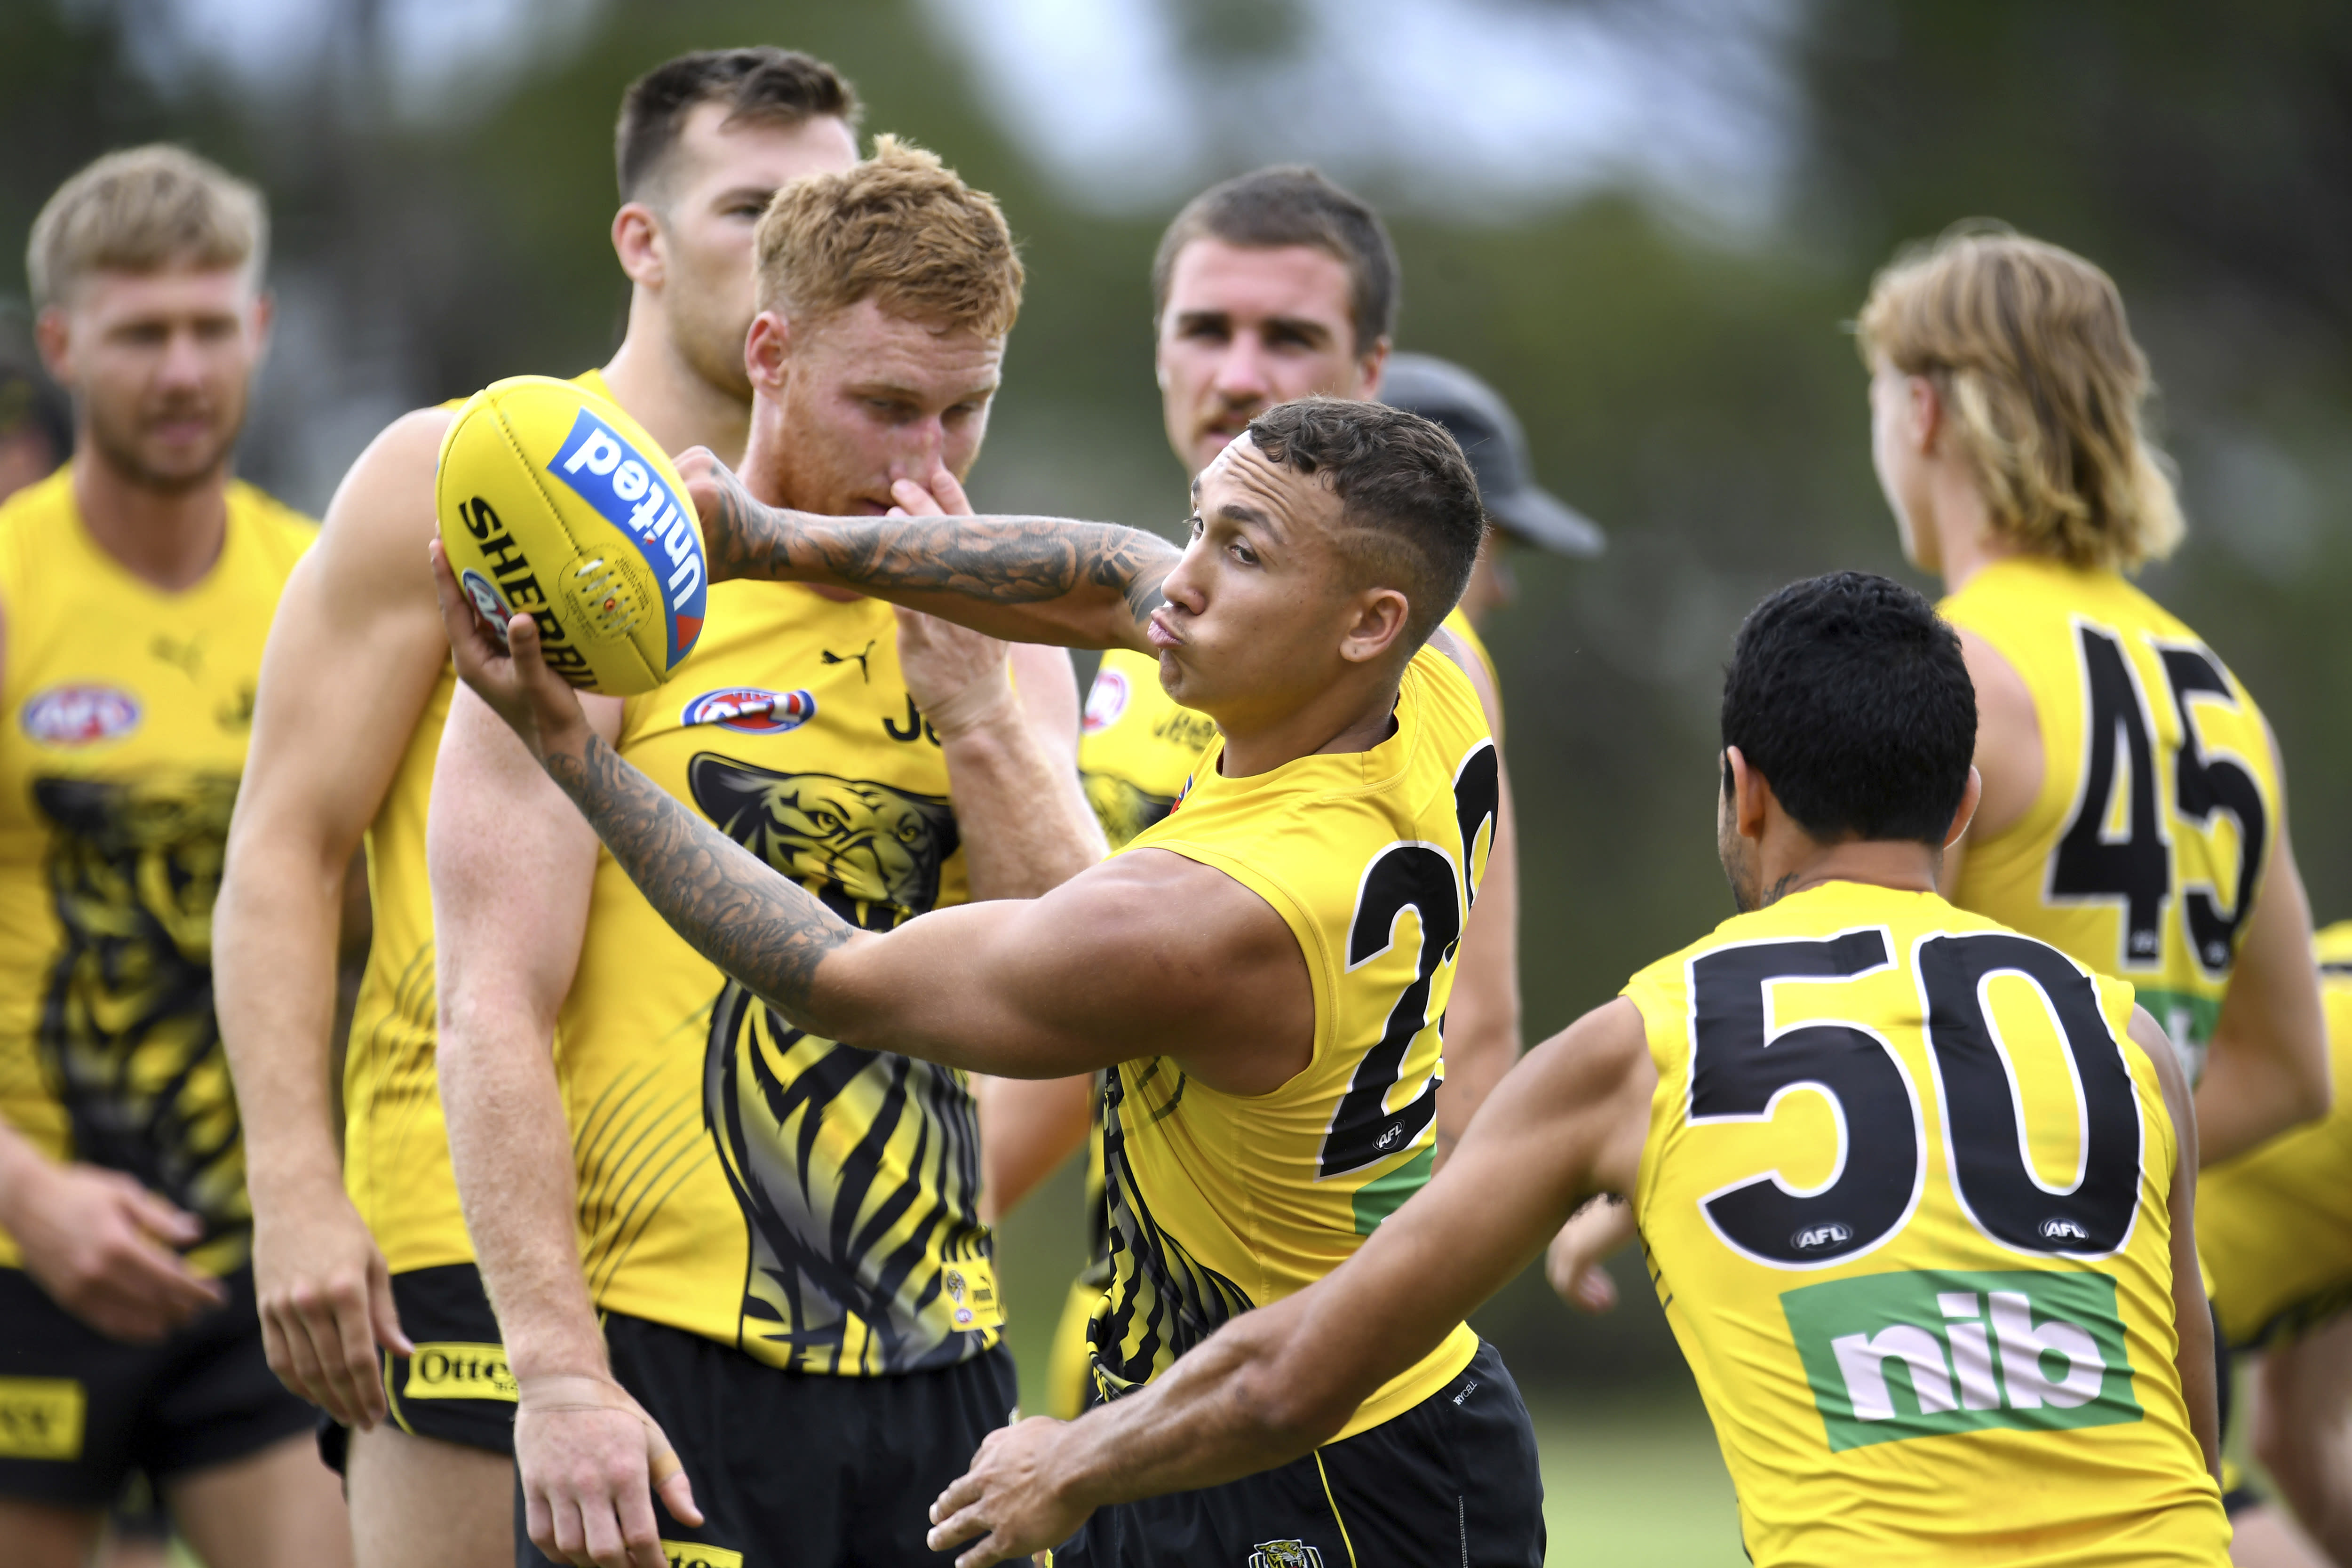 Richmond wins 3rd title in 4 years in Aussie rules football